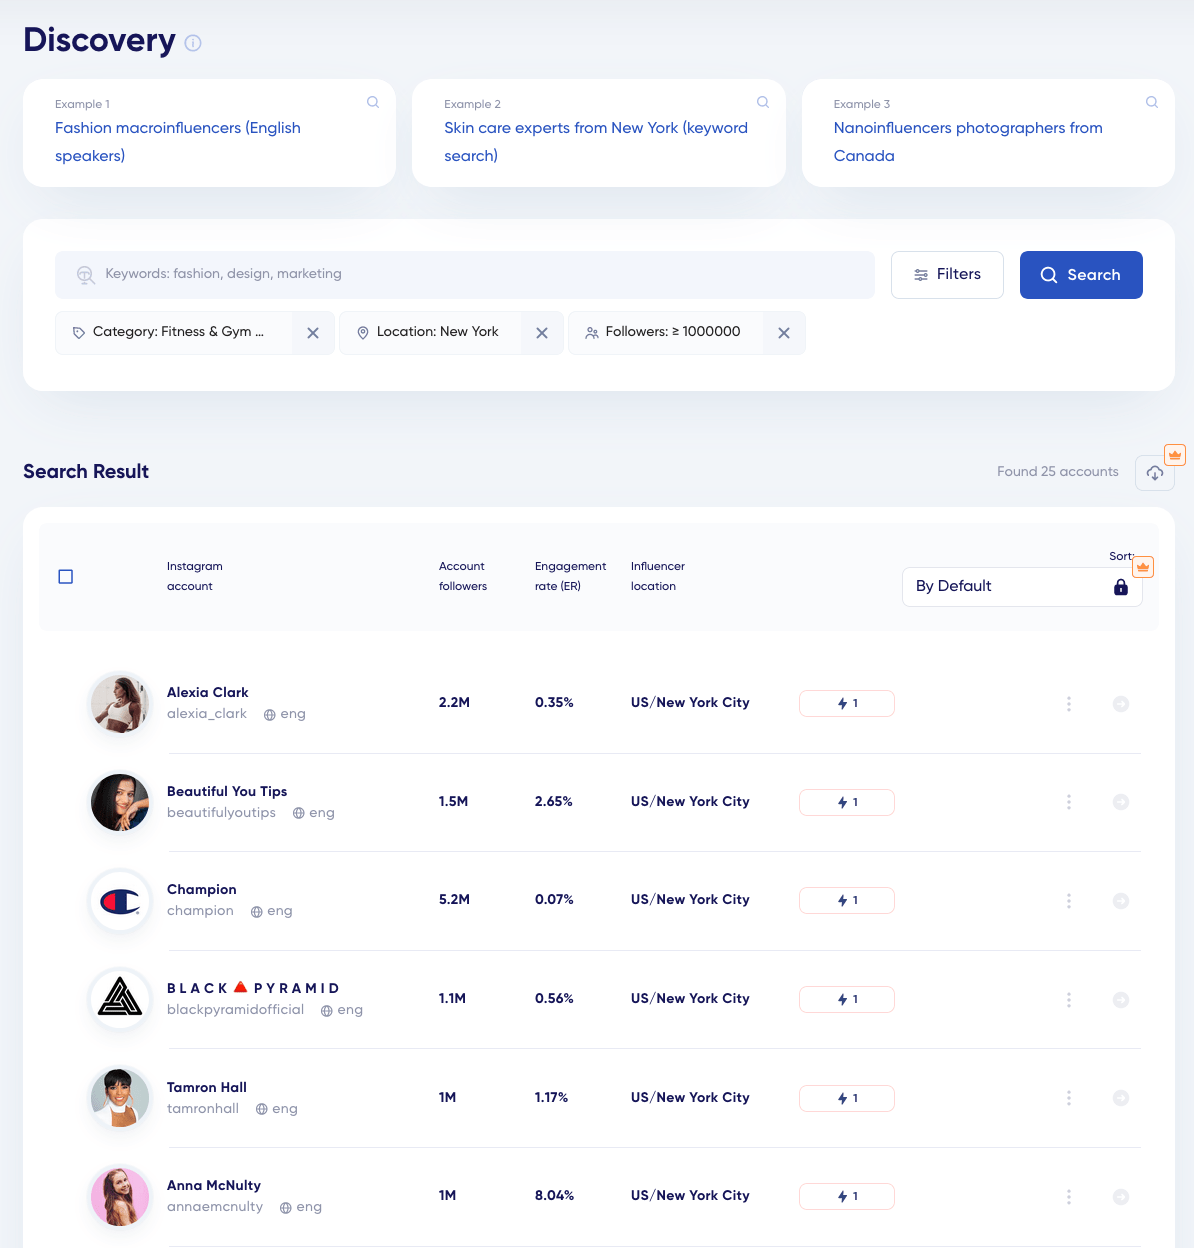 List of Instagram accounts with corresponding data on account followers, engagement rate, etc., in trendHERO